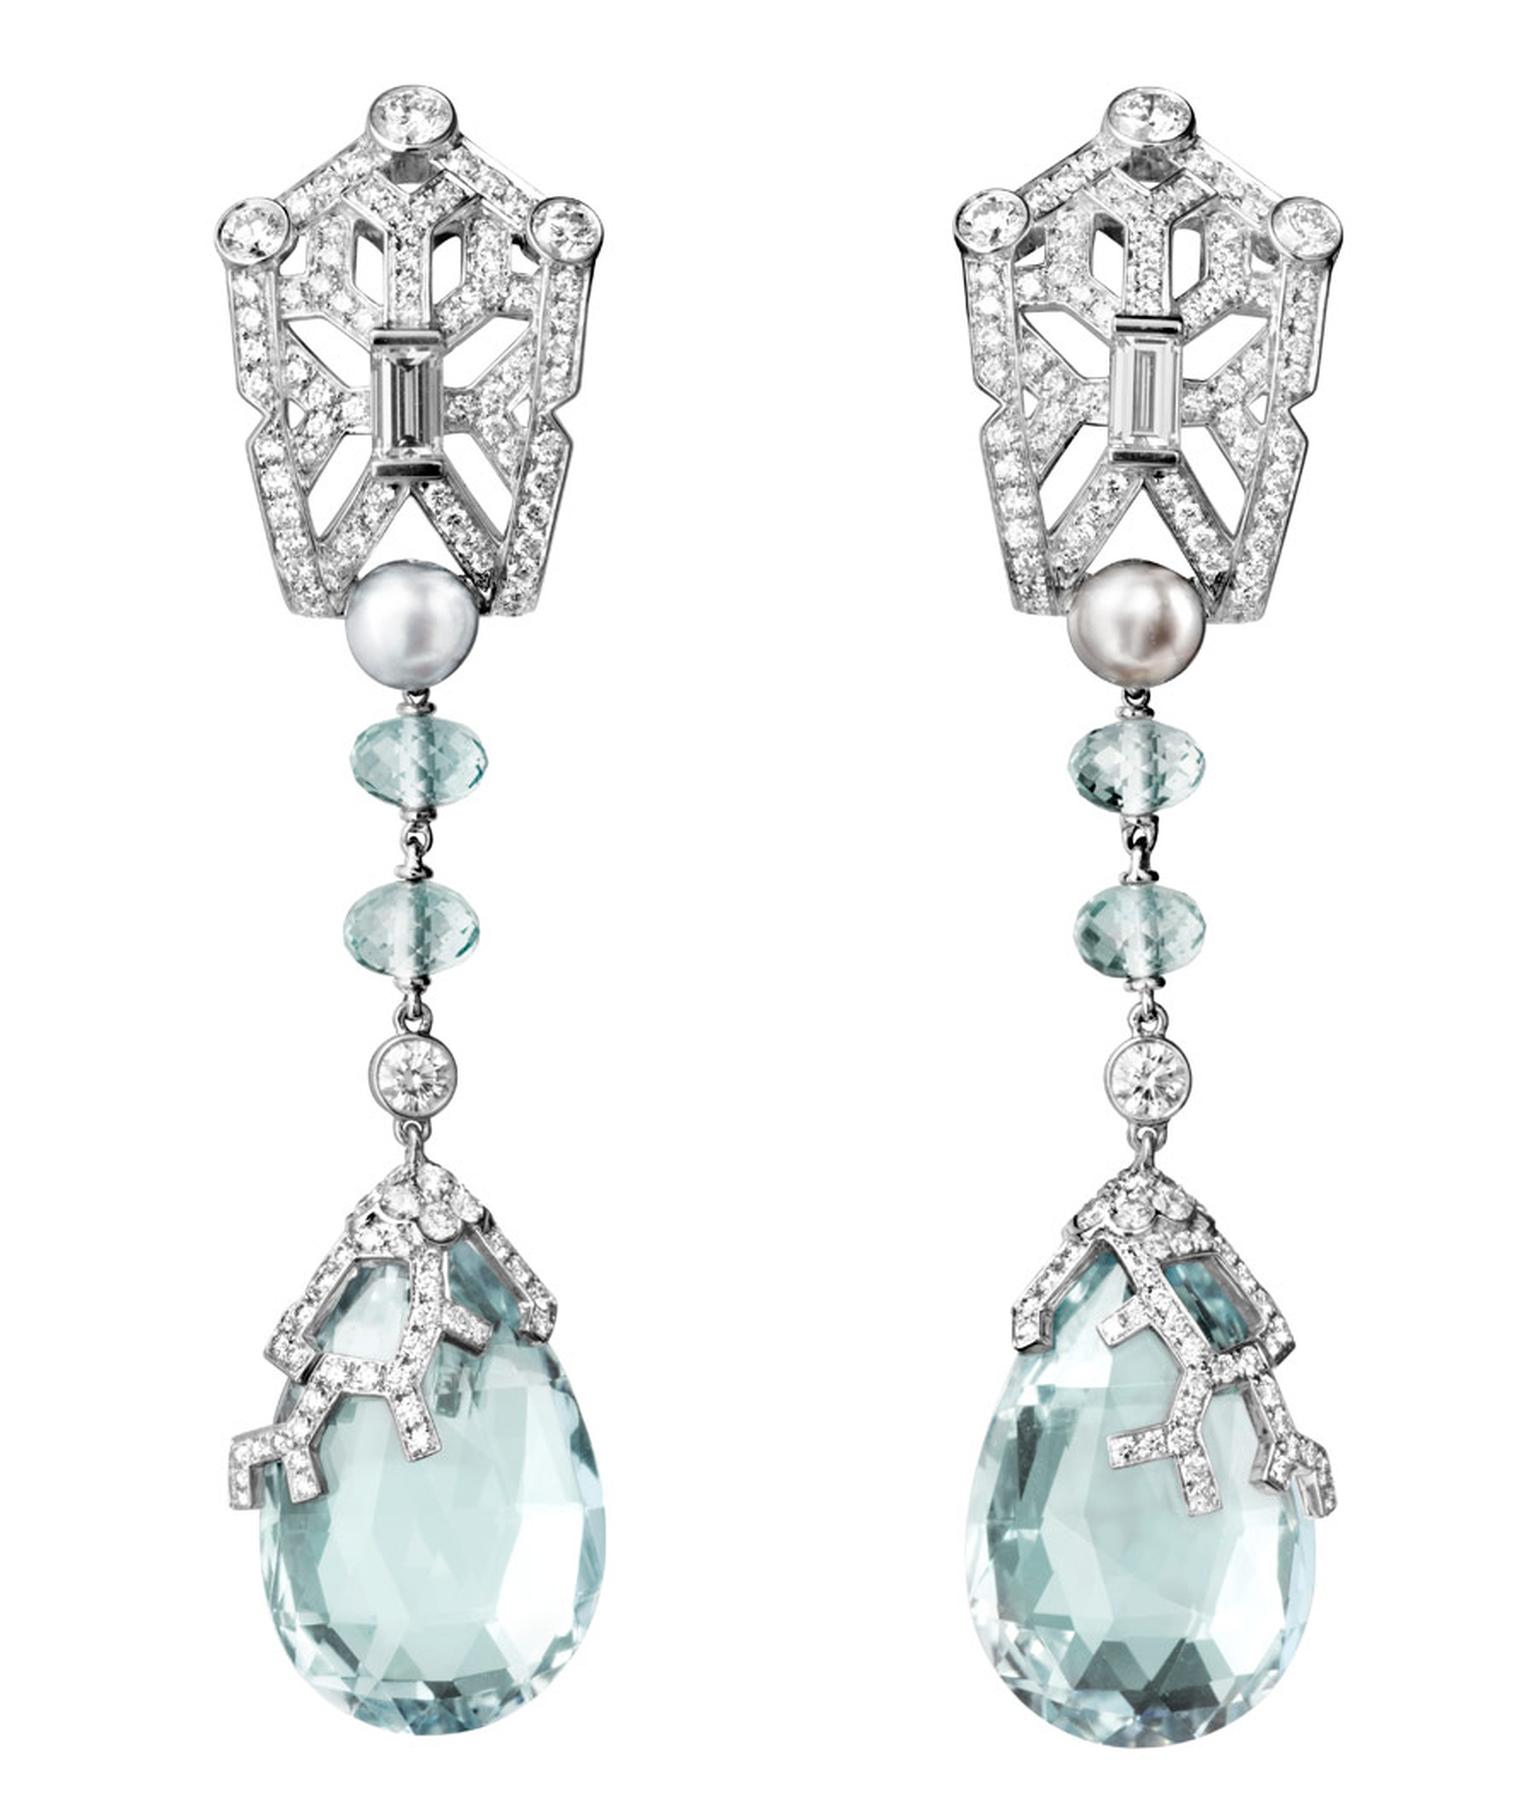 Cartier platinum Boreal Earrings featuring aquamarines, natural pearls and baguette-cut diamonds, brilliants. Image by: Vincent Wulveryck © Cartier 2012